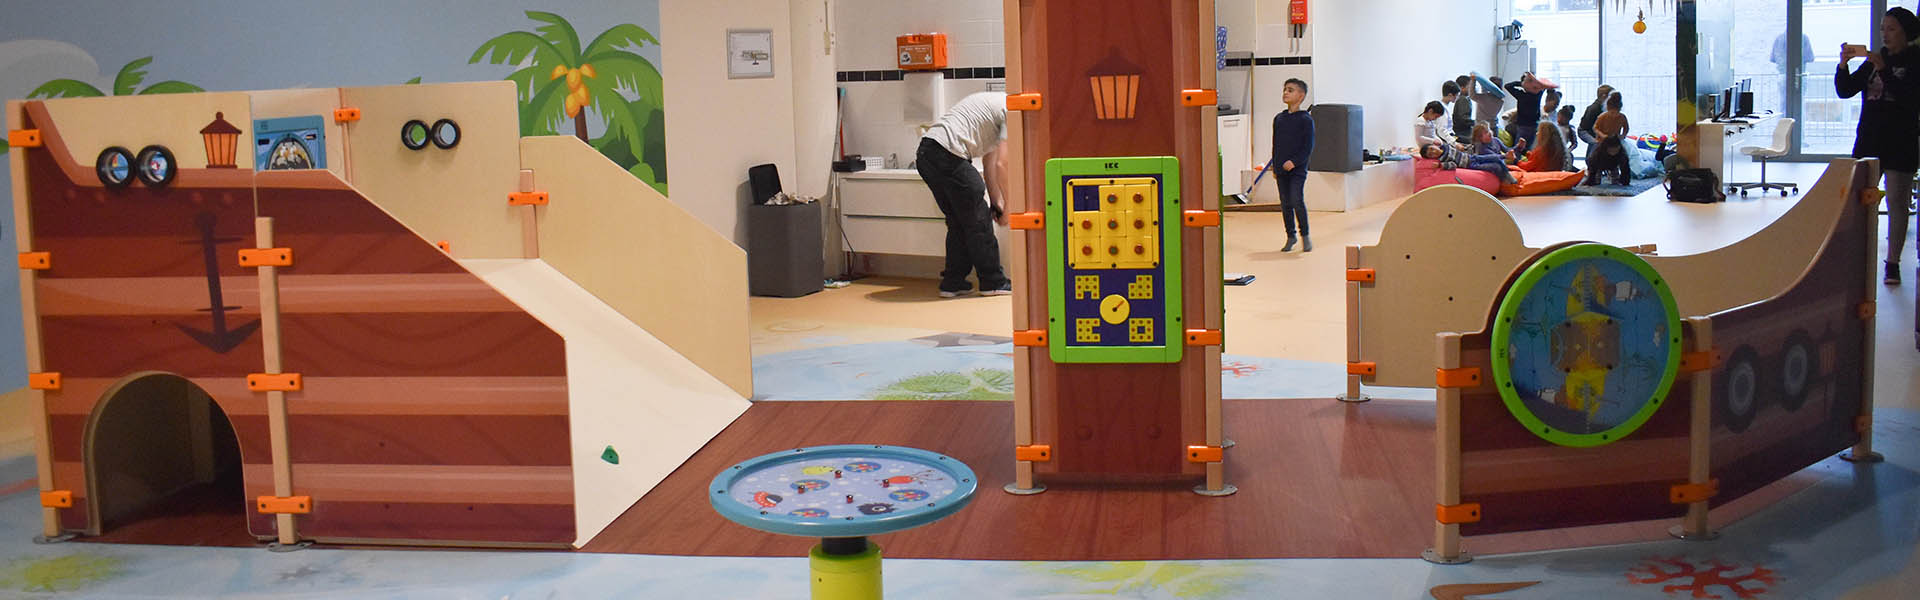 This image shows an interactive play corner daycare